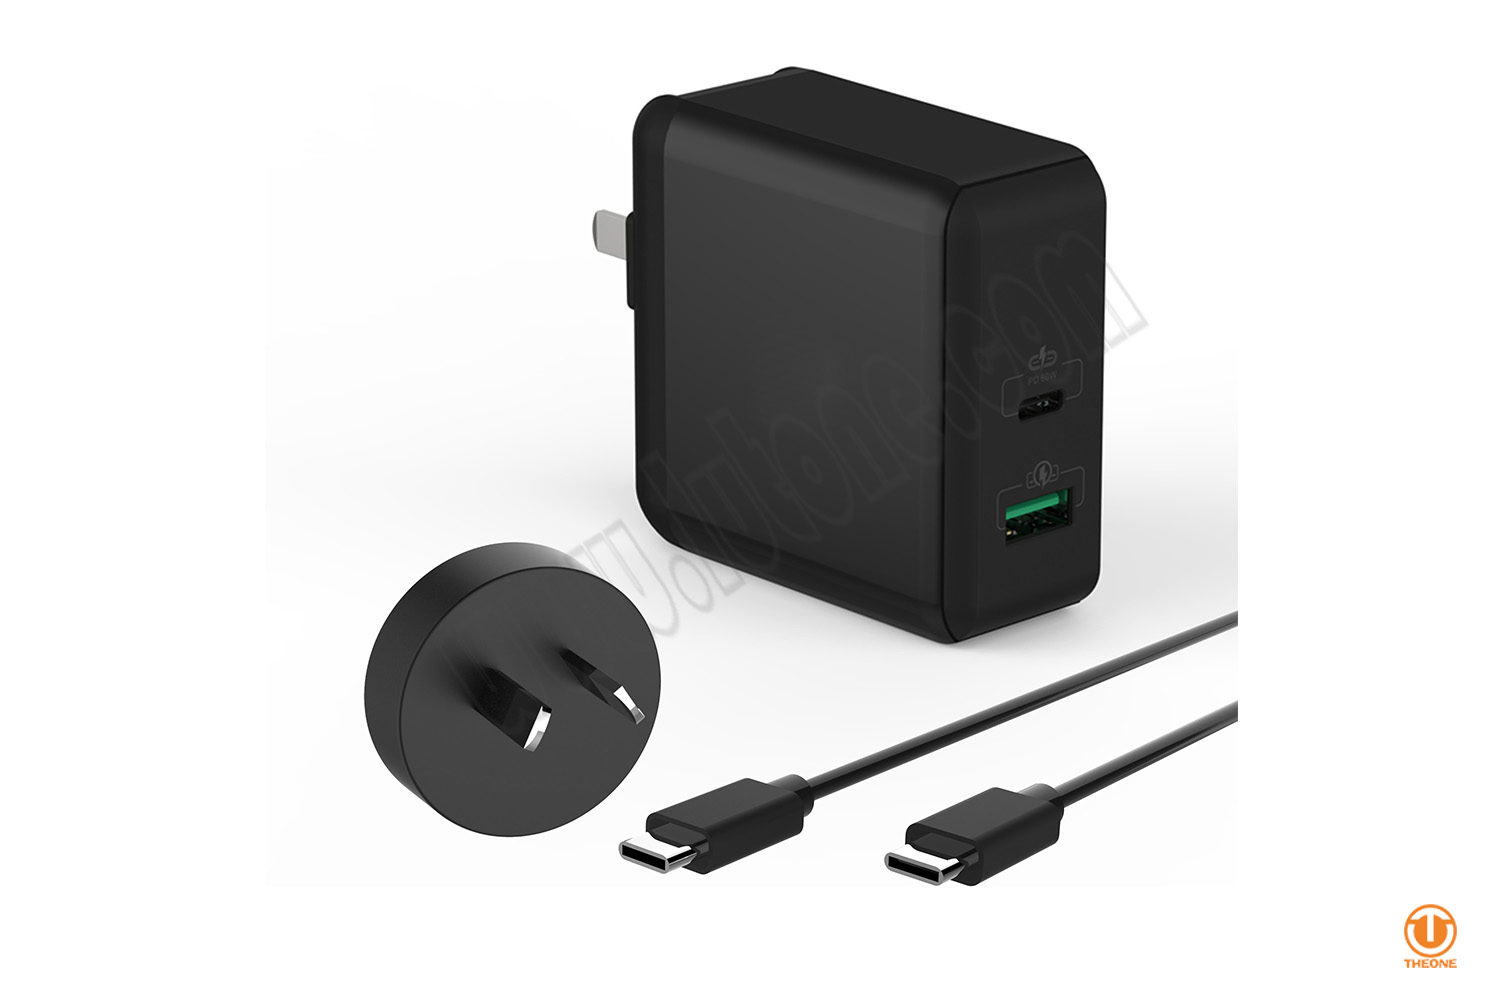 60W USB-C PD Power Adapter (with extra USB port)